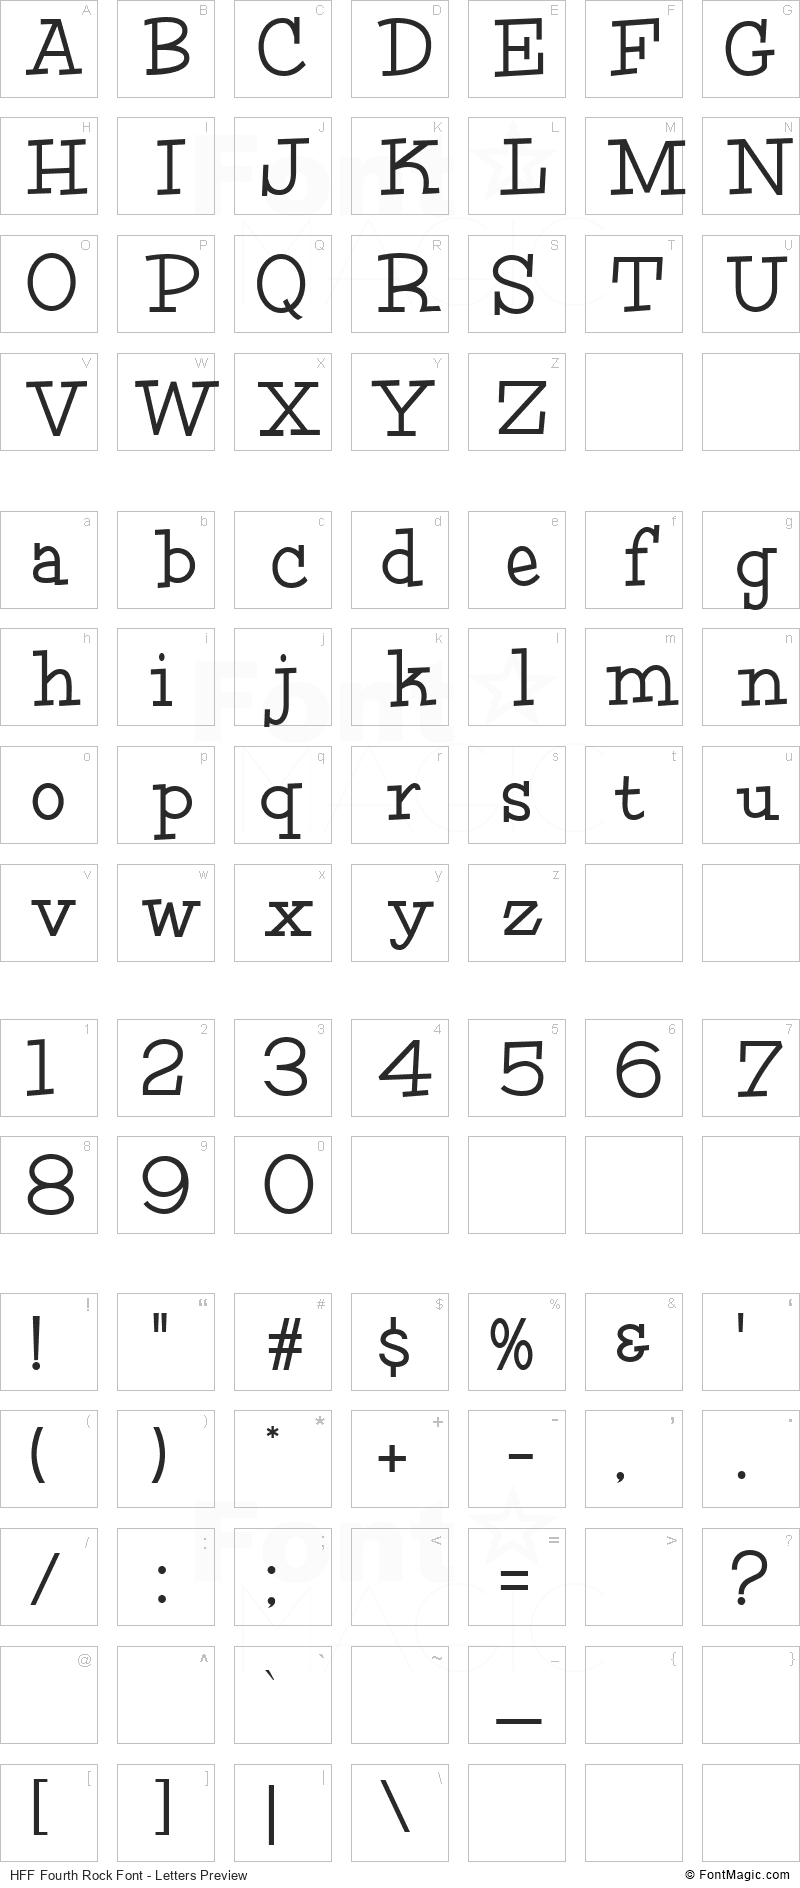 HFF Fourth Rock Font - All Latters Preview Chart